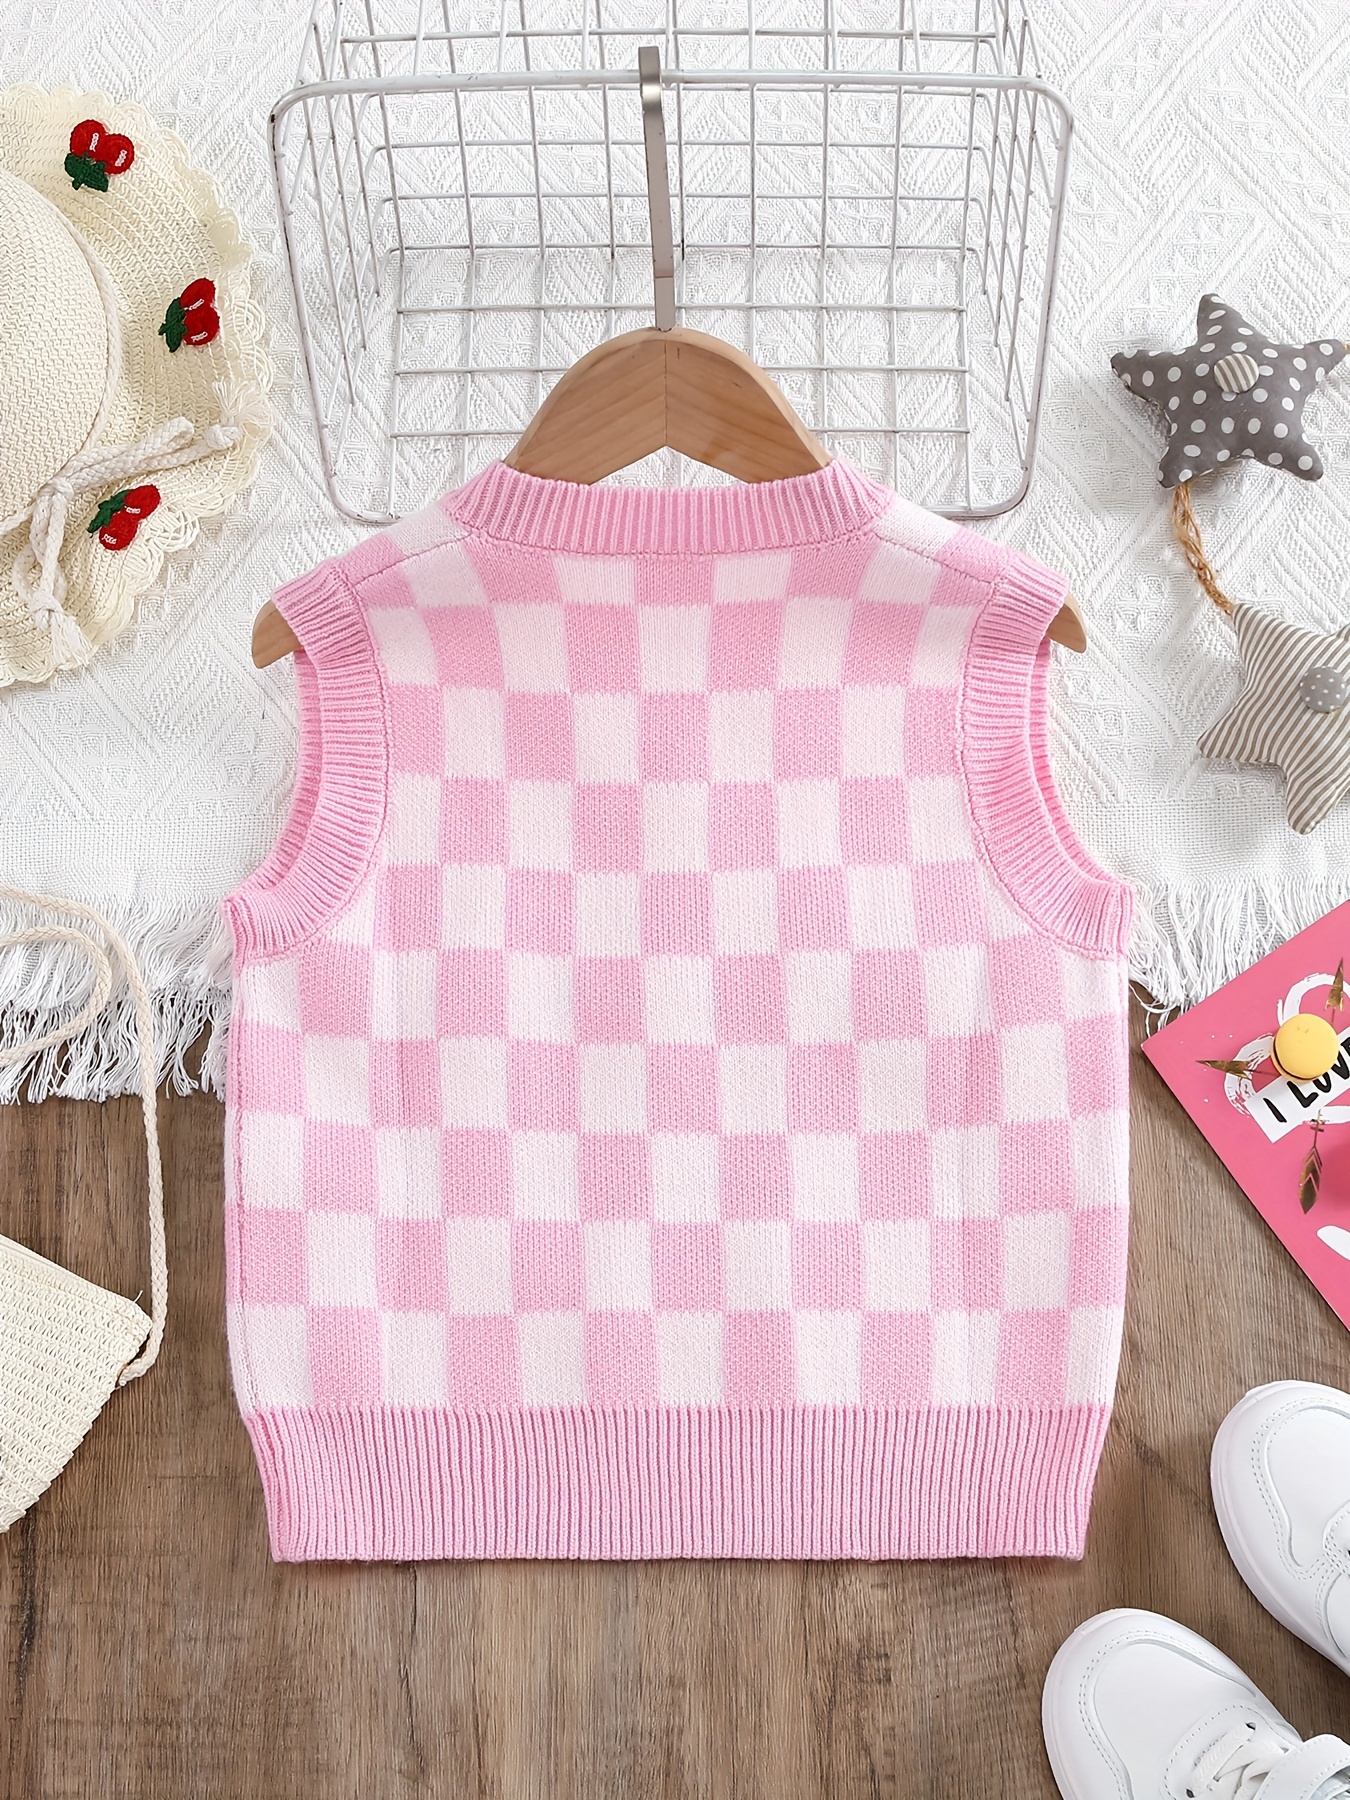 Cute Girls' Checkered Vest V Neck Sleeveless Top For Spring/ Autumn, Party,  Gift, Girls' Clothing